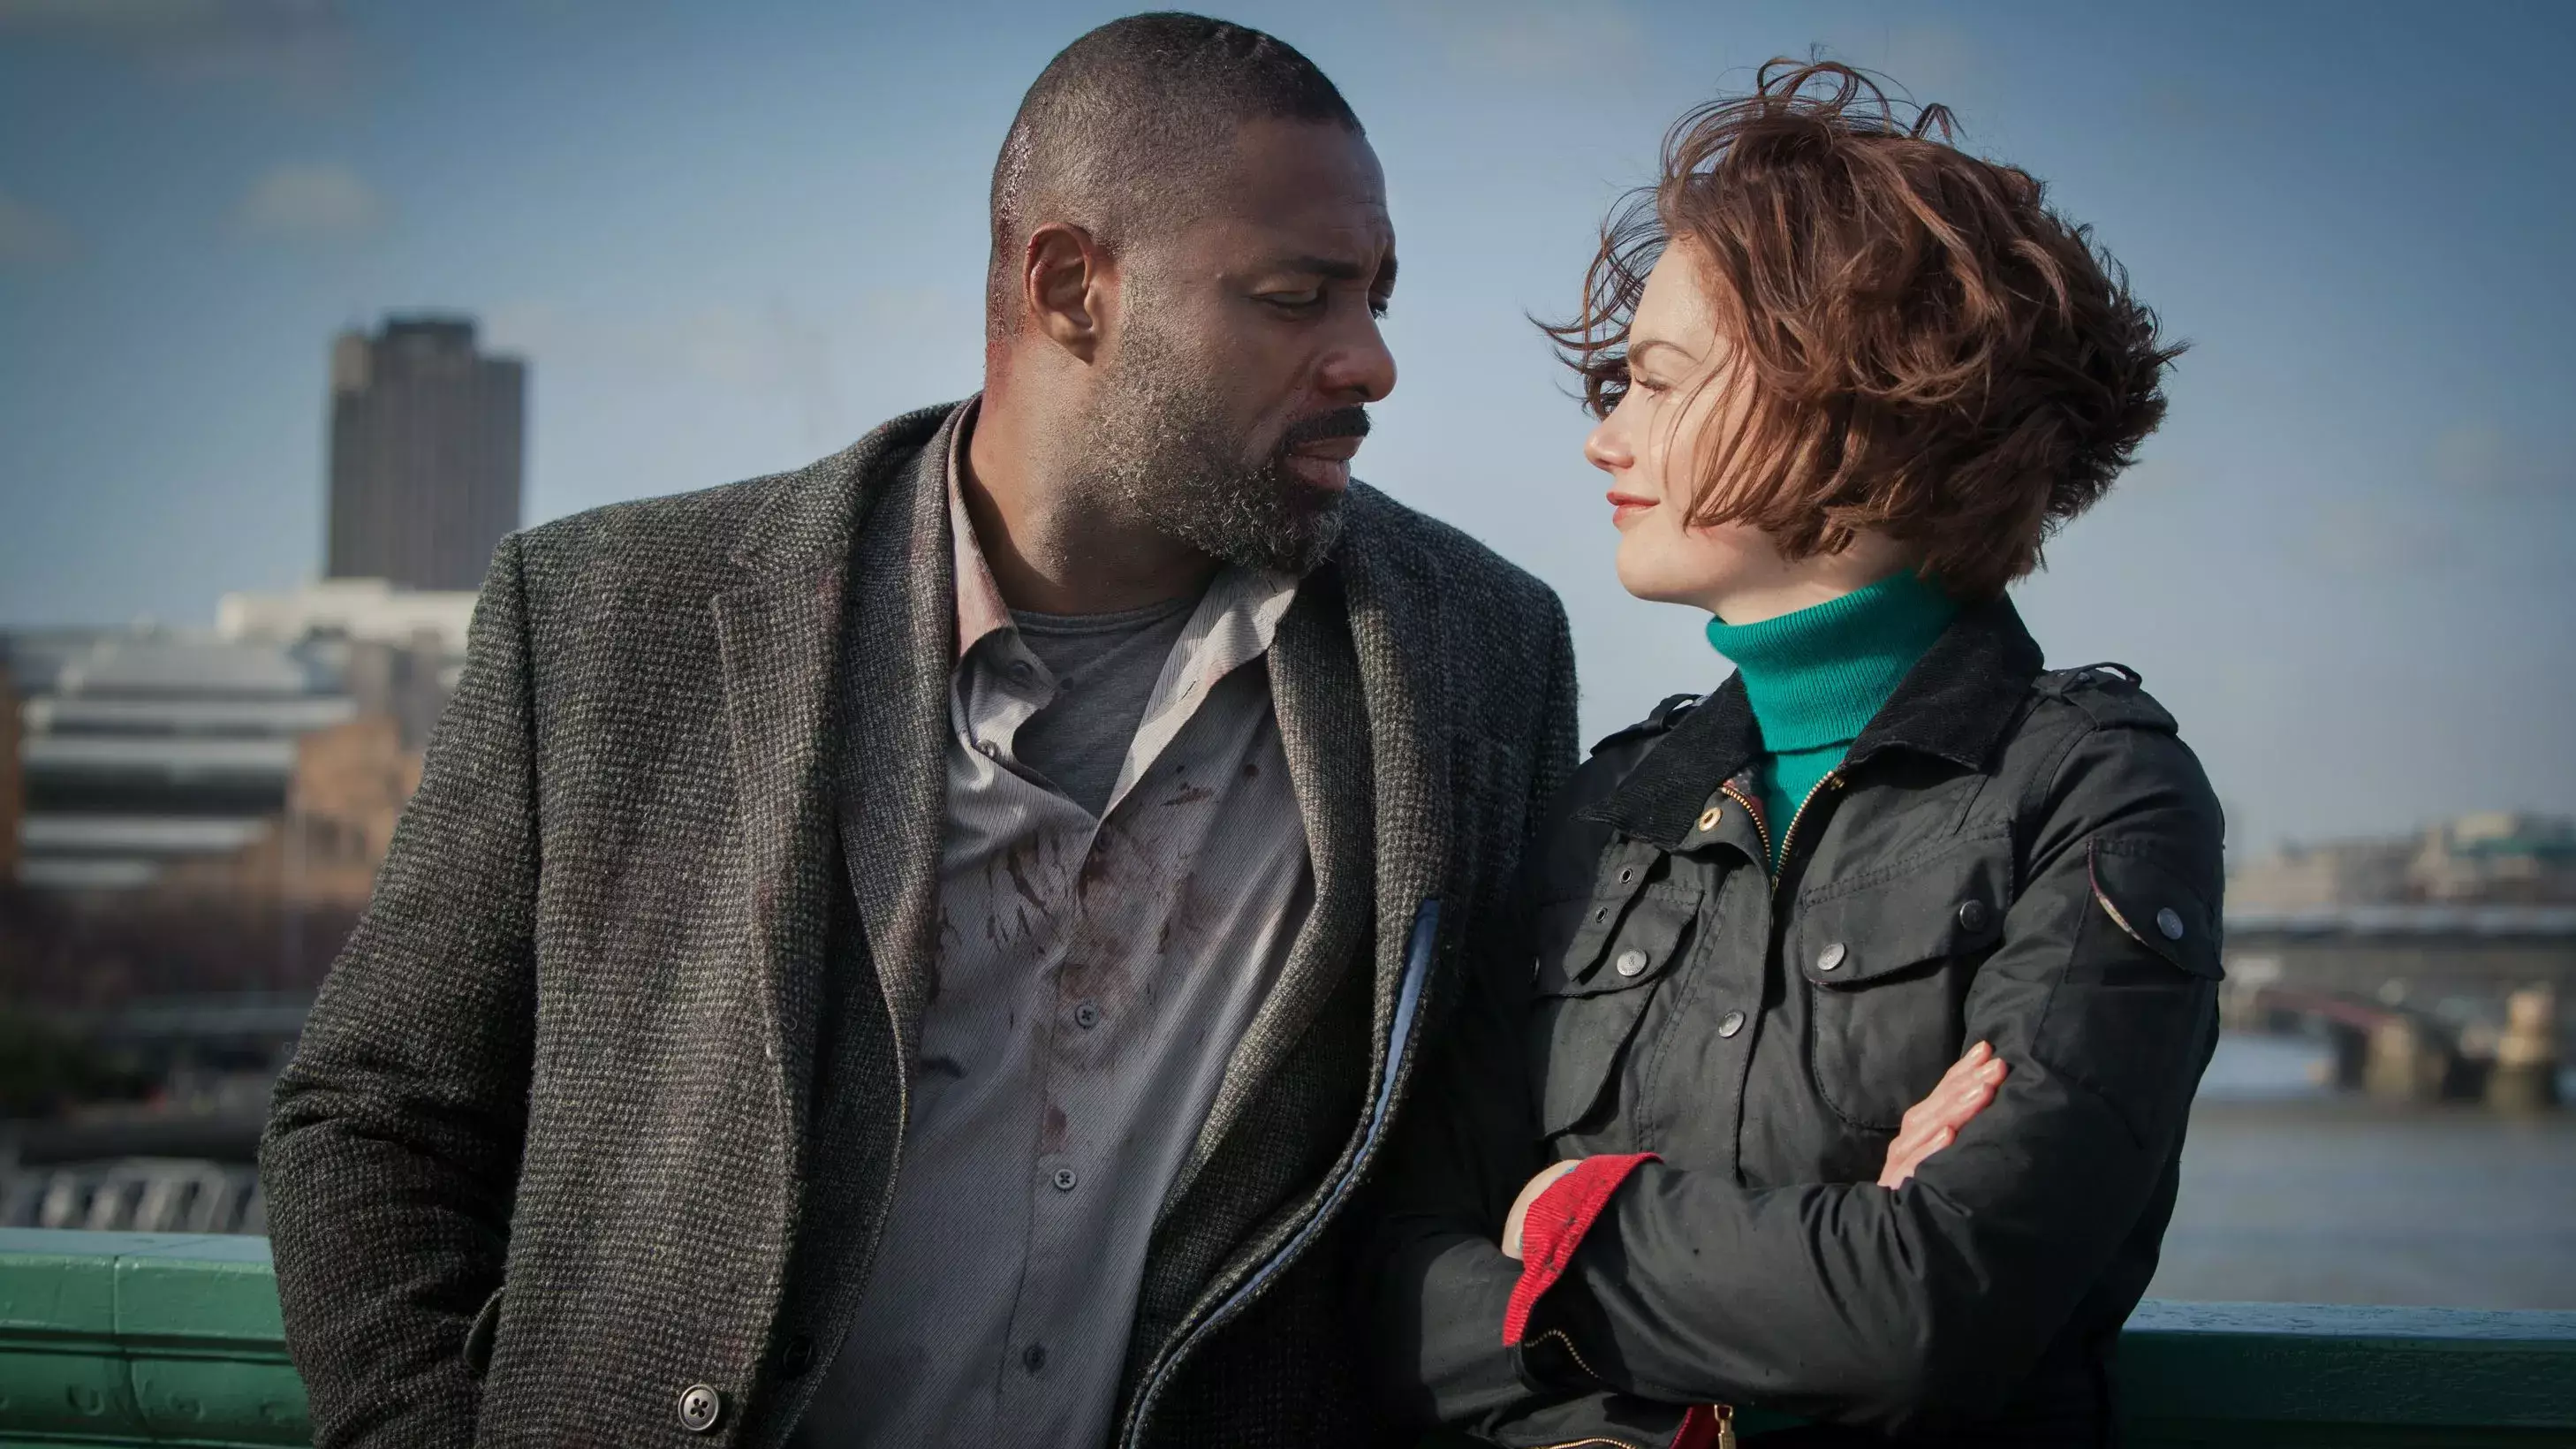 More Luther Is On The Way, Creator Confirms